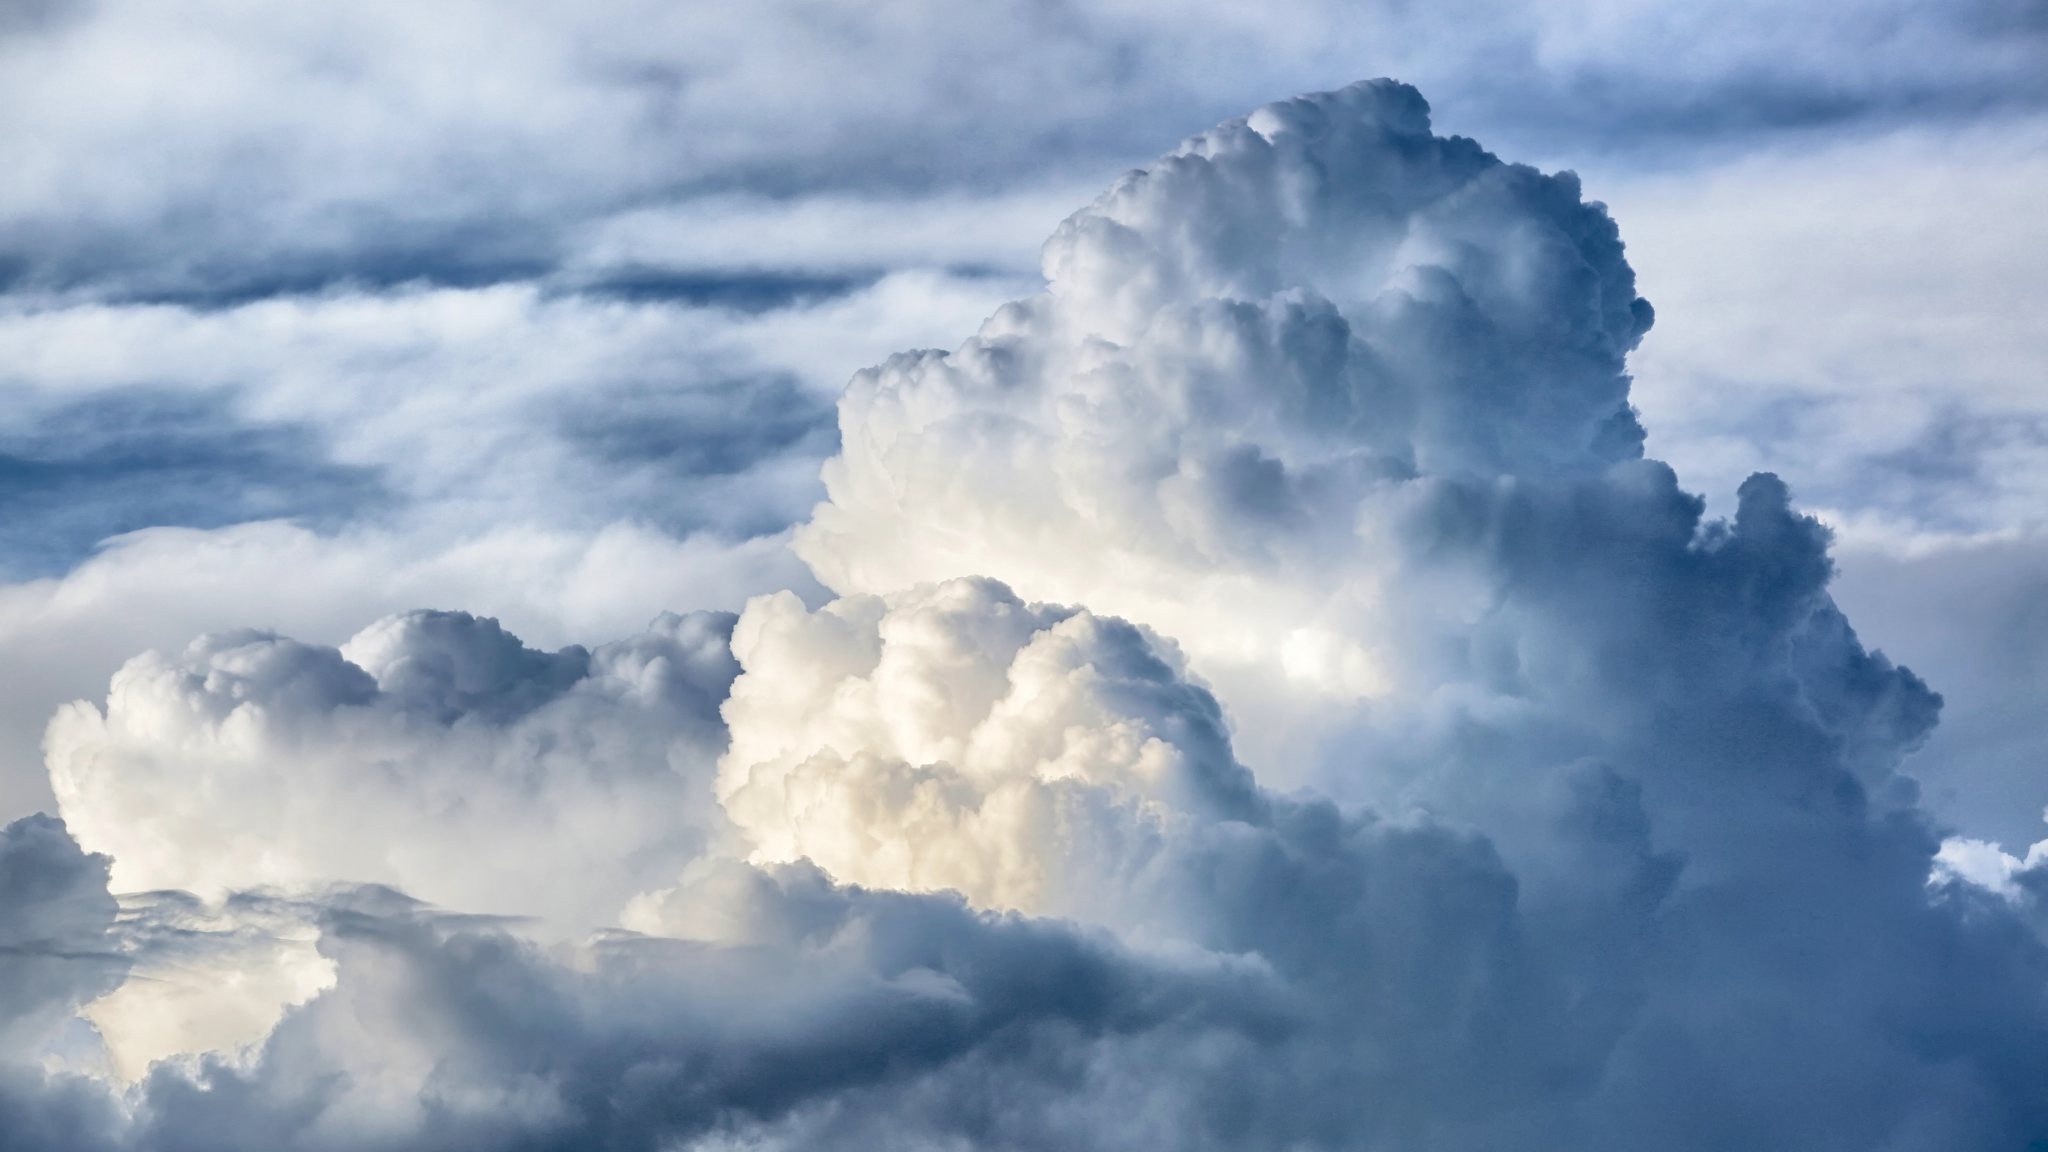 Download 2048x1152 Wallpaper Clouds Nature White Sky Dual Wide Widescreen 2048x1152 Hd Image Background 15751